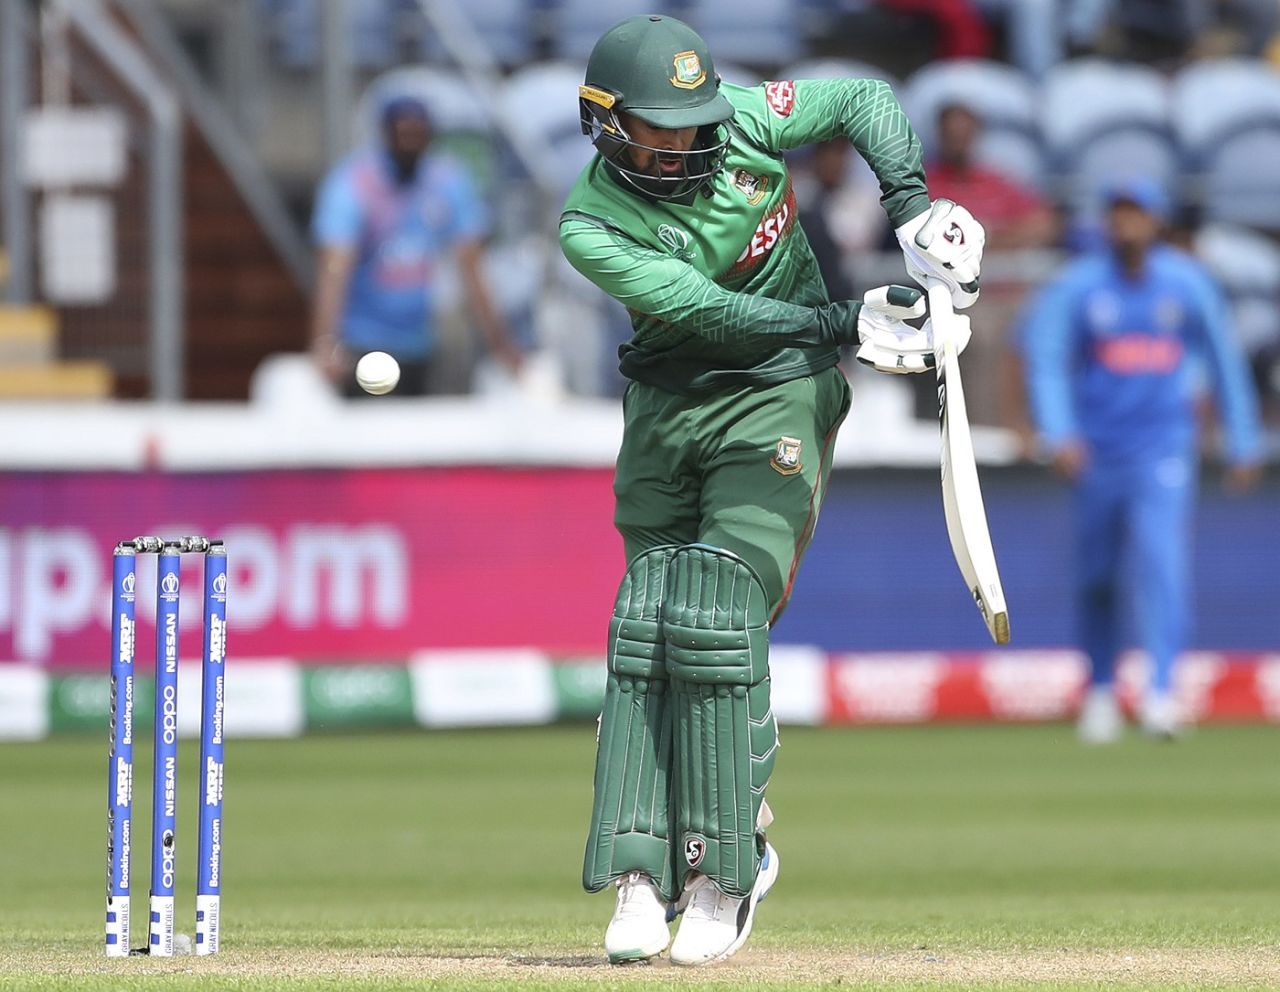 Liton Das clips one to fine-leg, Bangladesh v India, World Cup 2019 warm-up, Cardiff, May 28, 2019